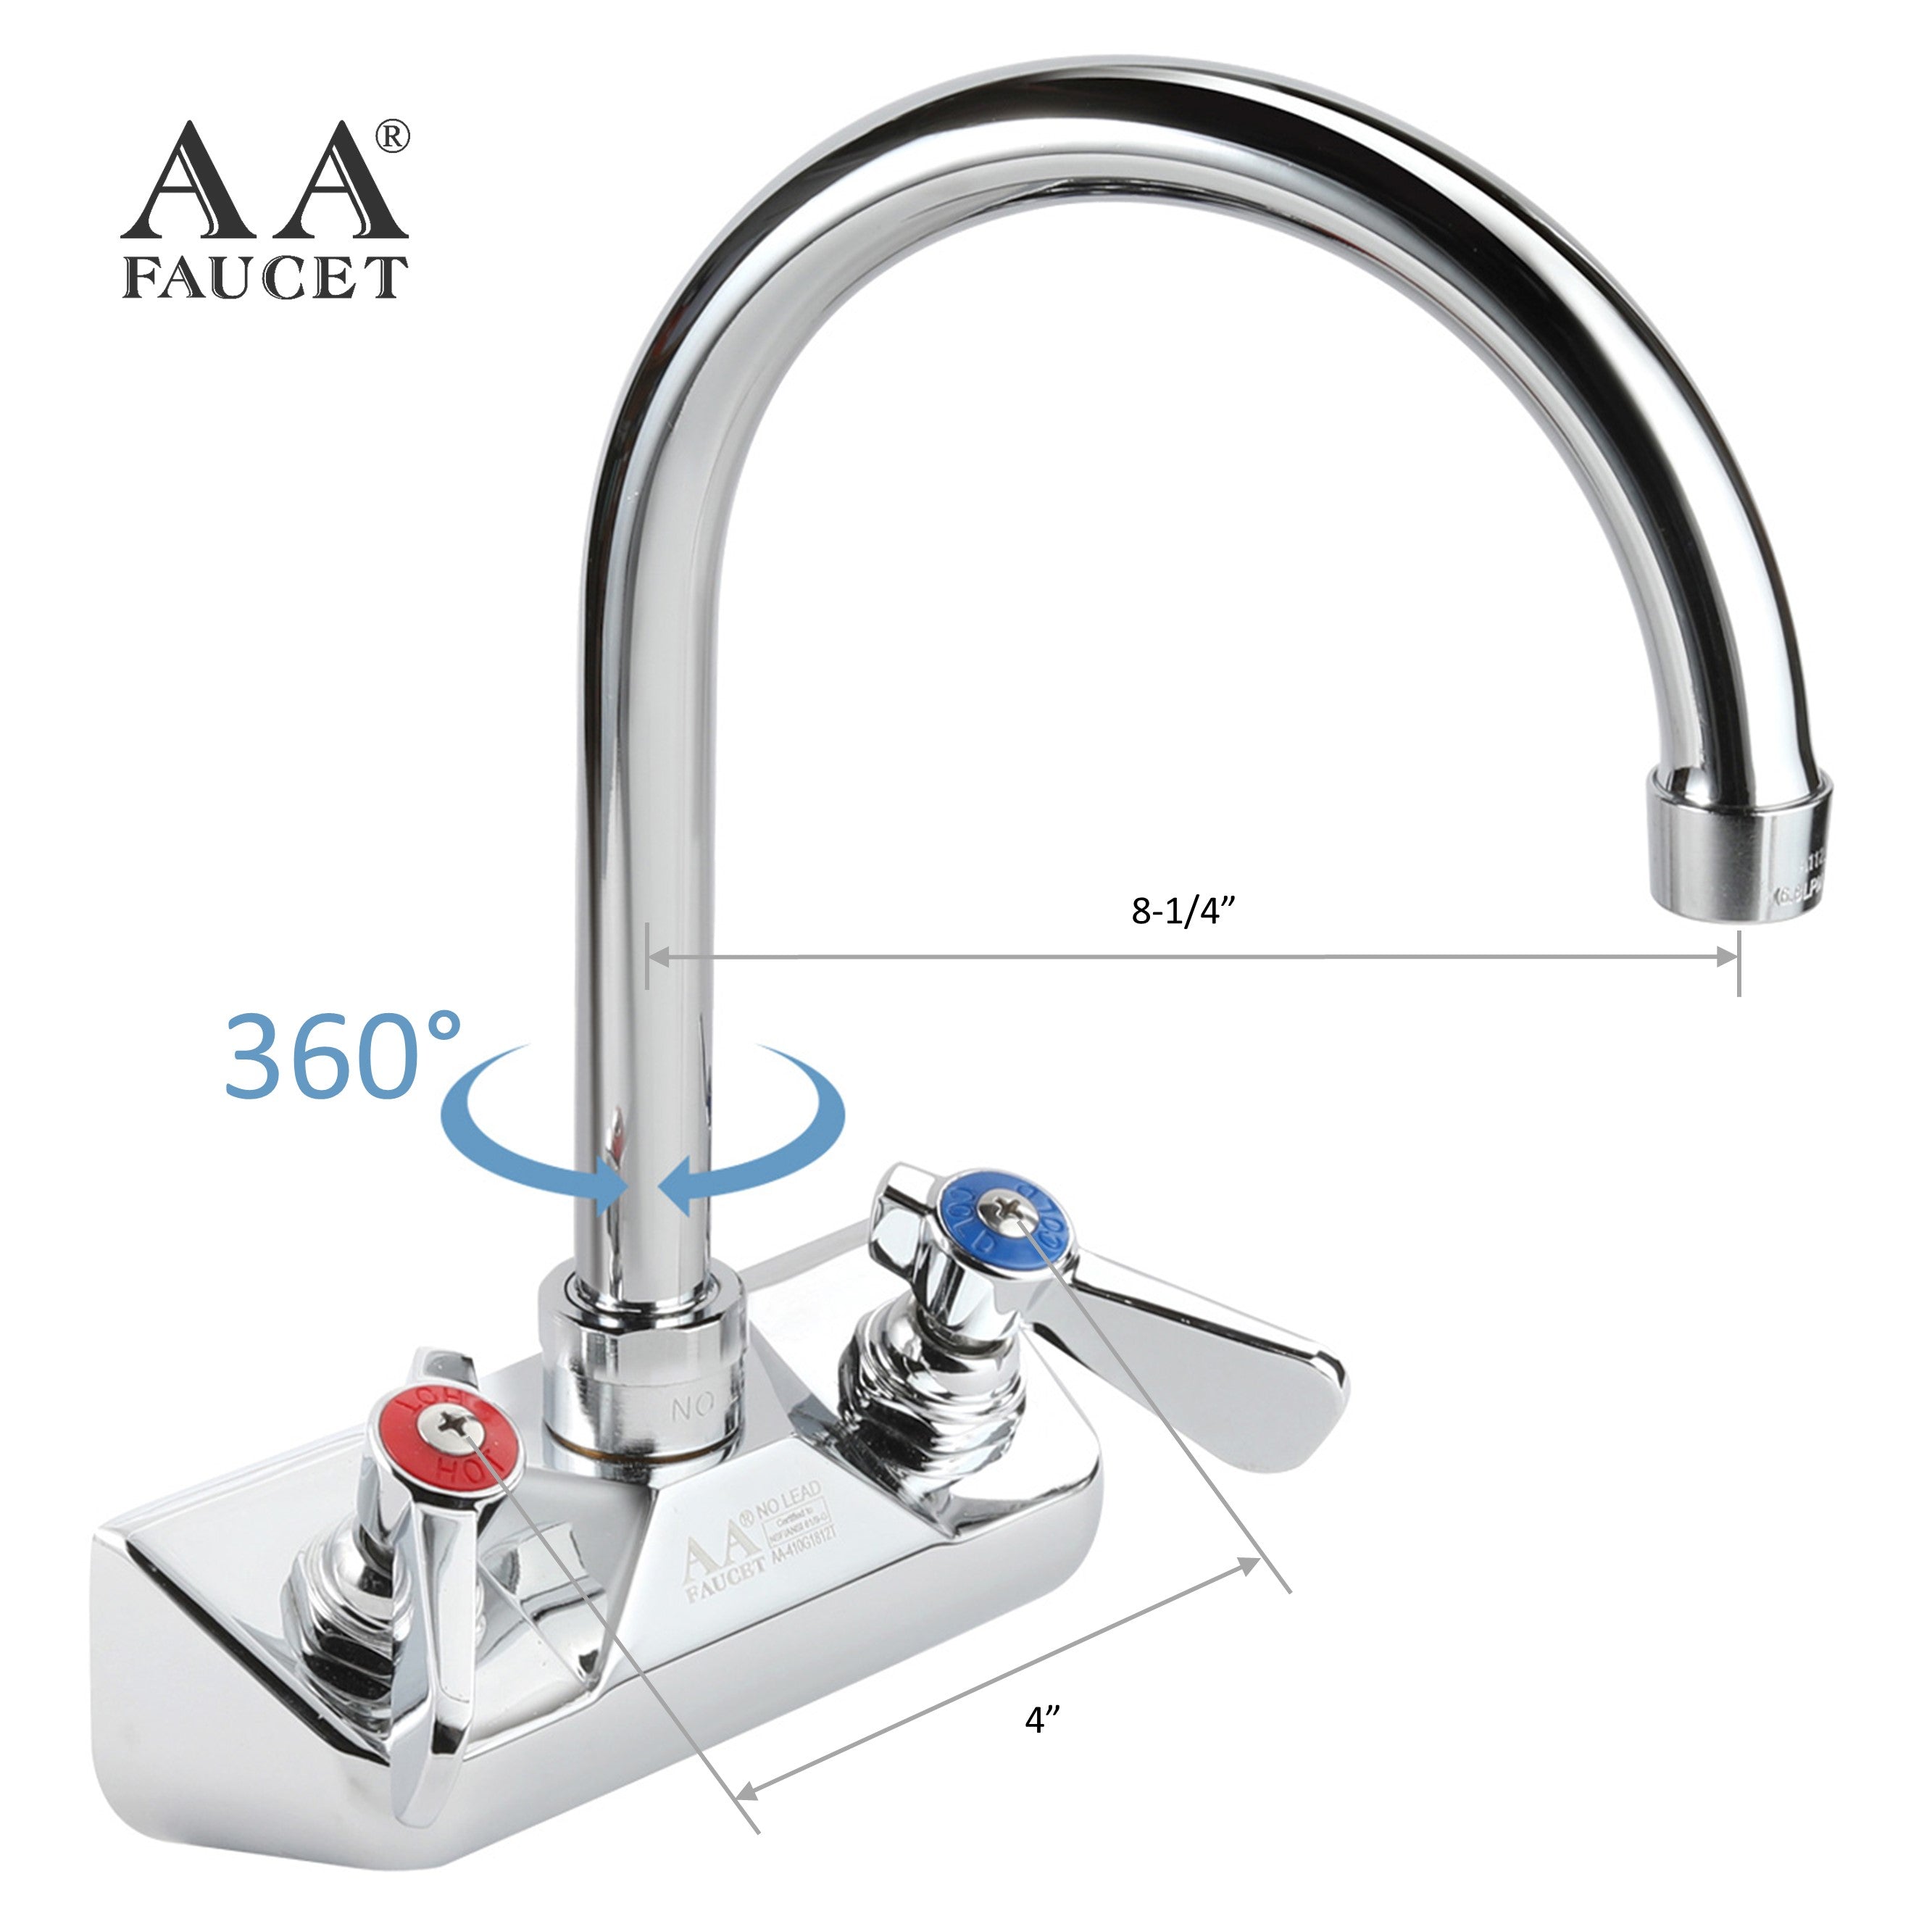 AA Faucet 4" Wall Mount No Lead Faucet with 8-1/4" Swivel Gooseneck Spout NSF Certified